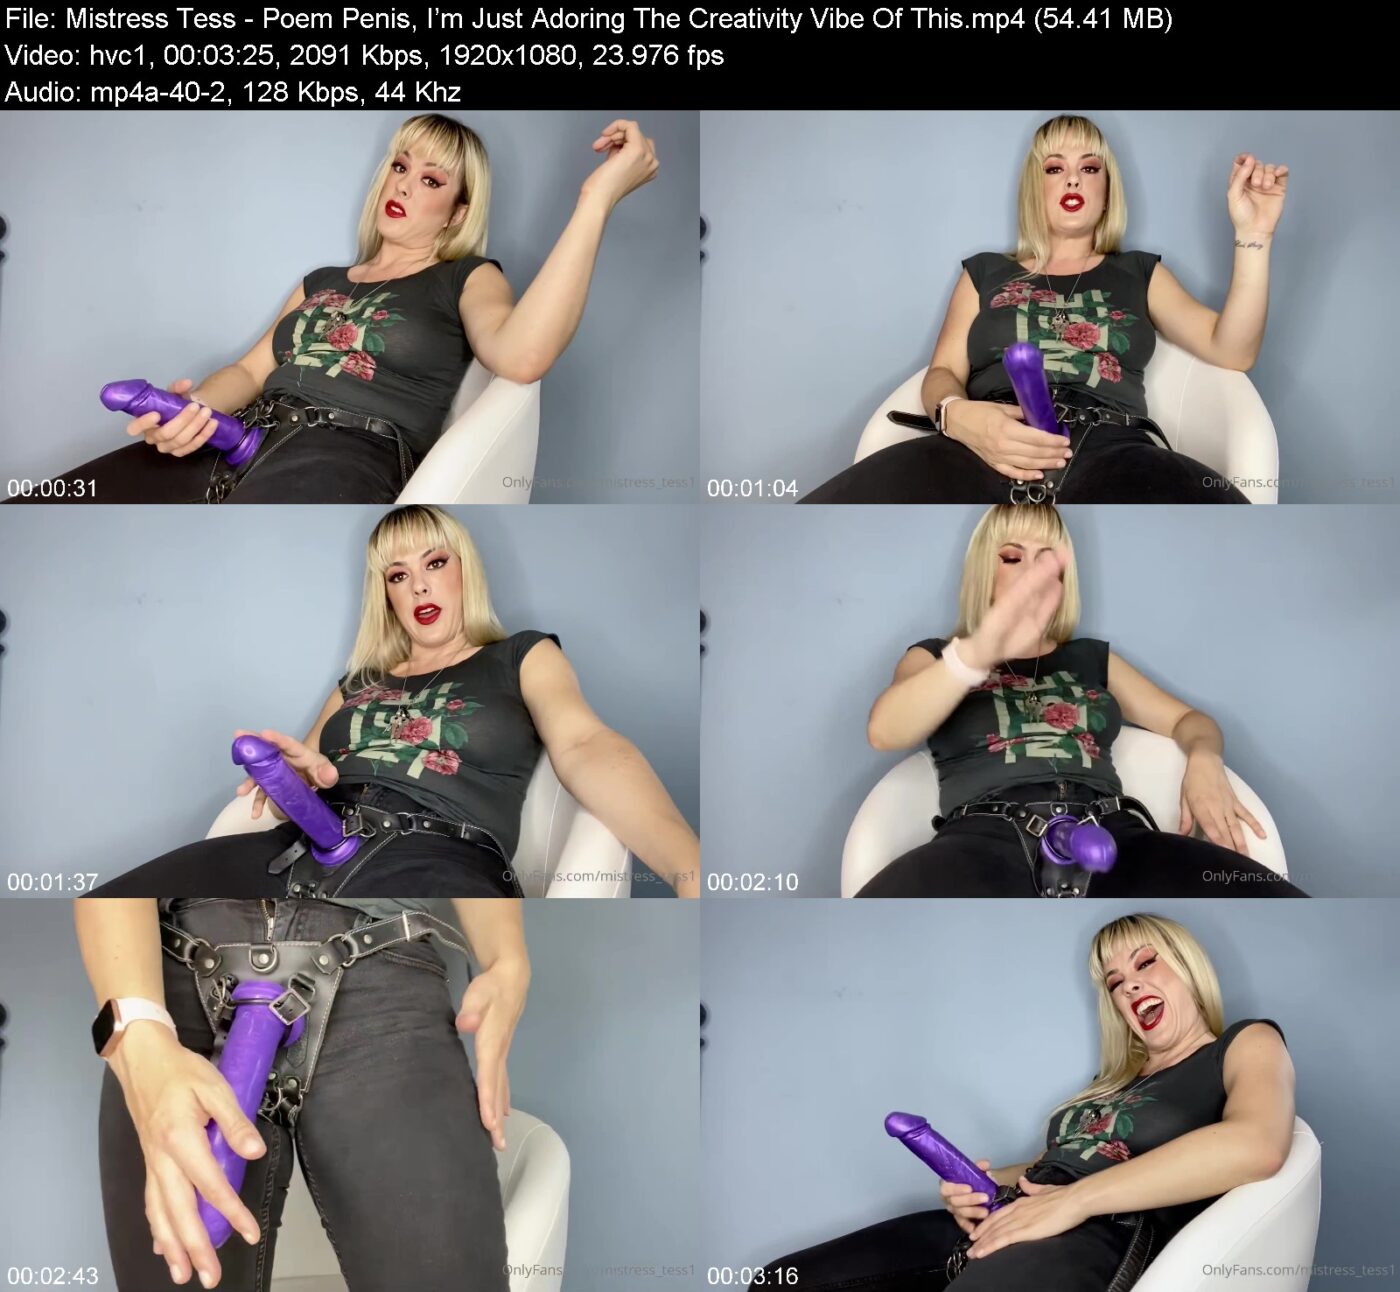 Actress: Mistress Tess. Title and Studio: Poem Penis, I’m Just Adoring The Creativity Vibe Of This